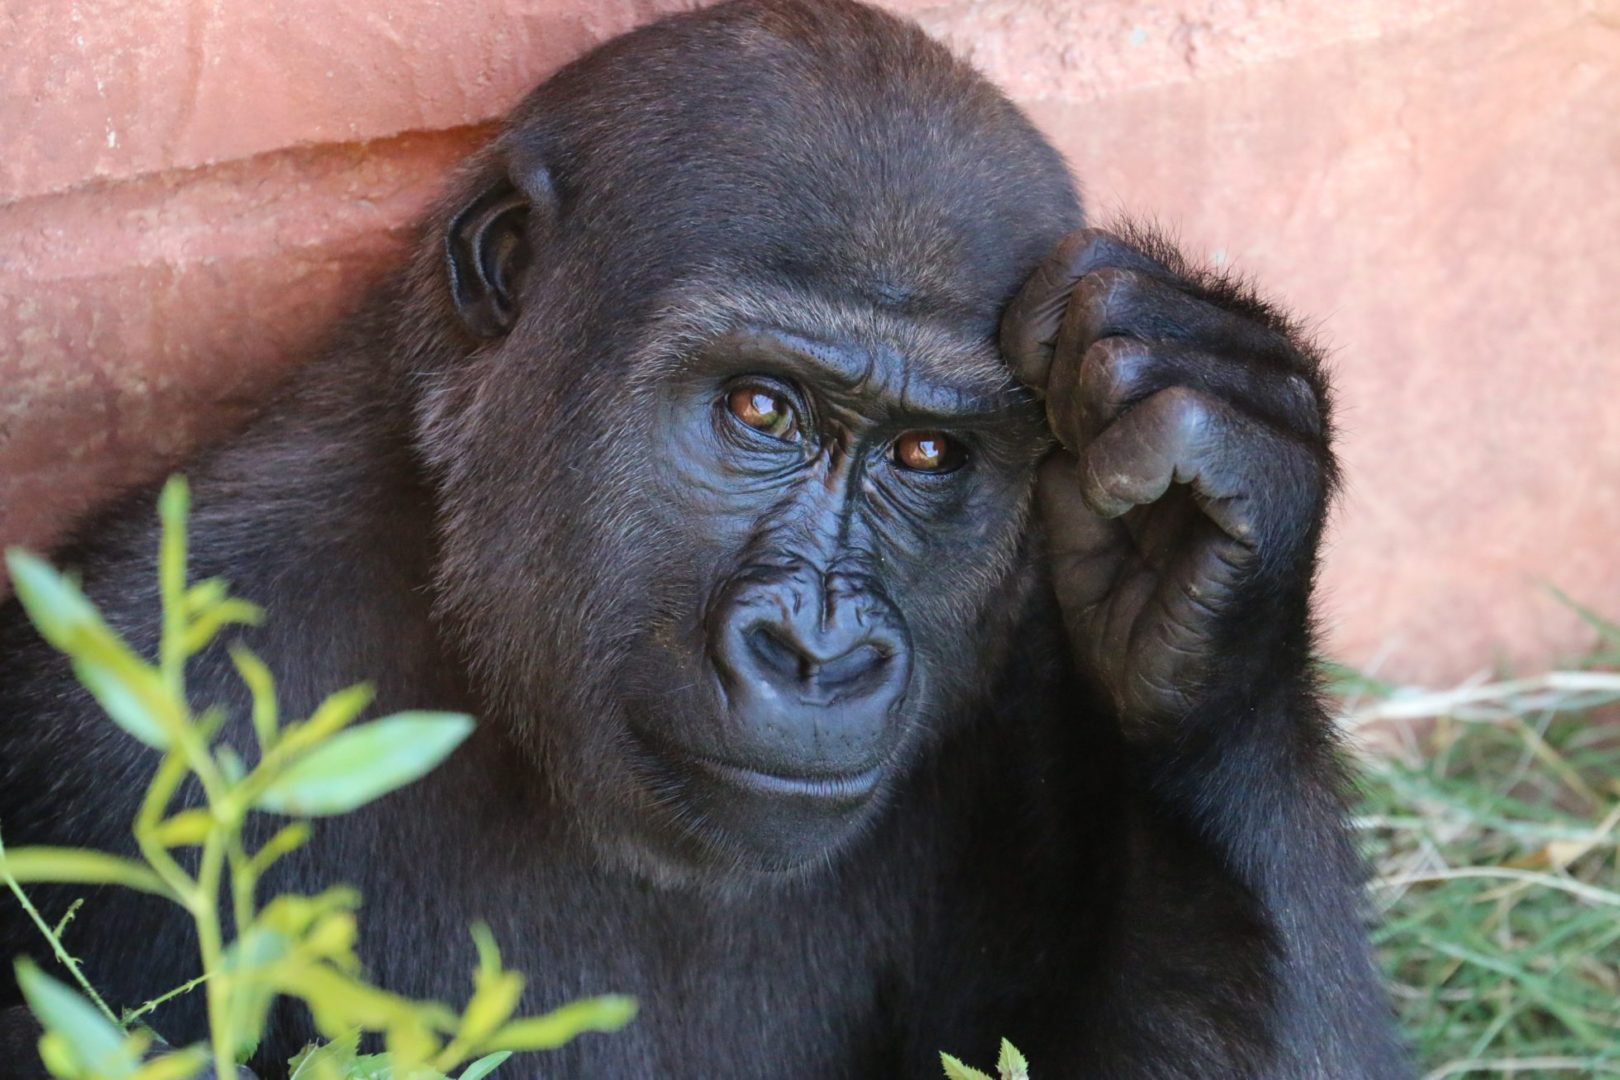 Gorilla - Wondering if they can take their research online